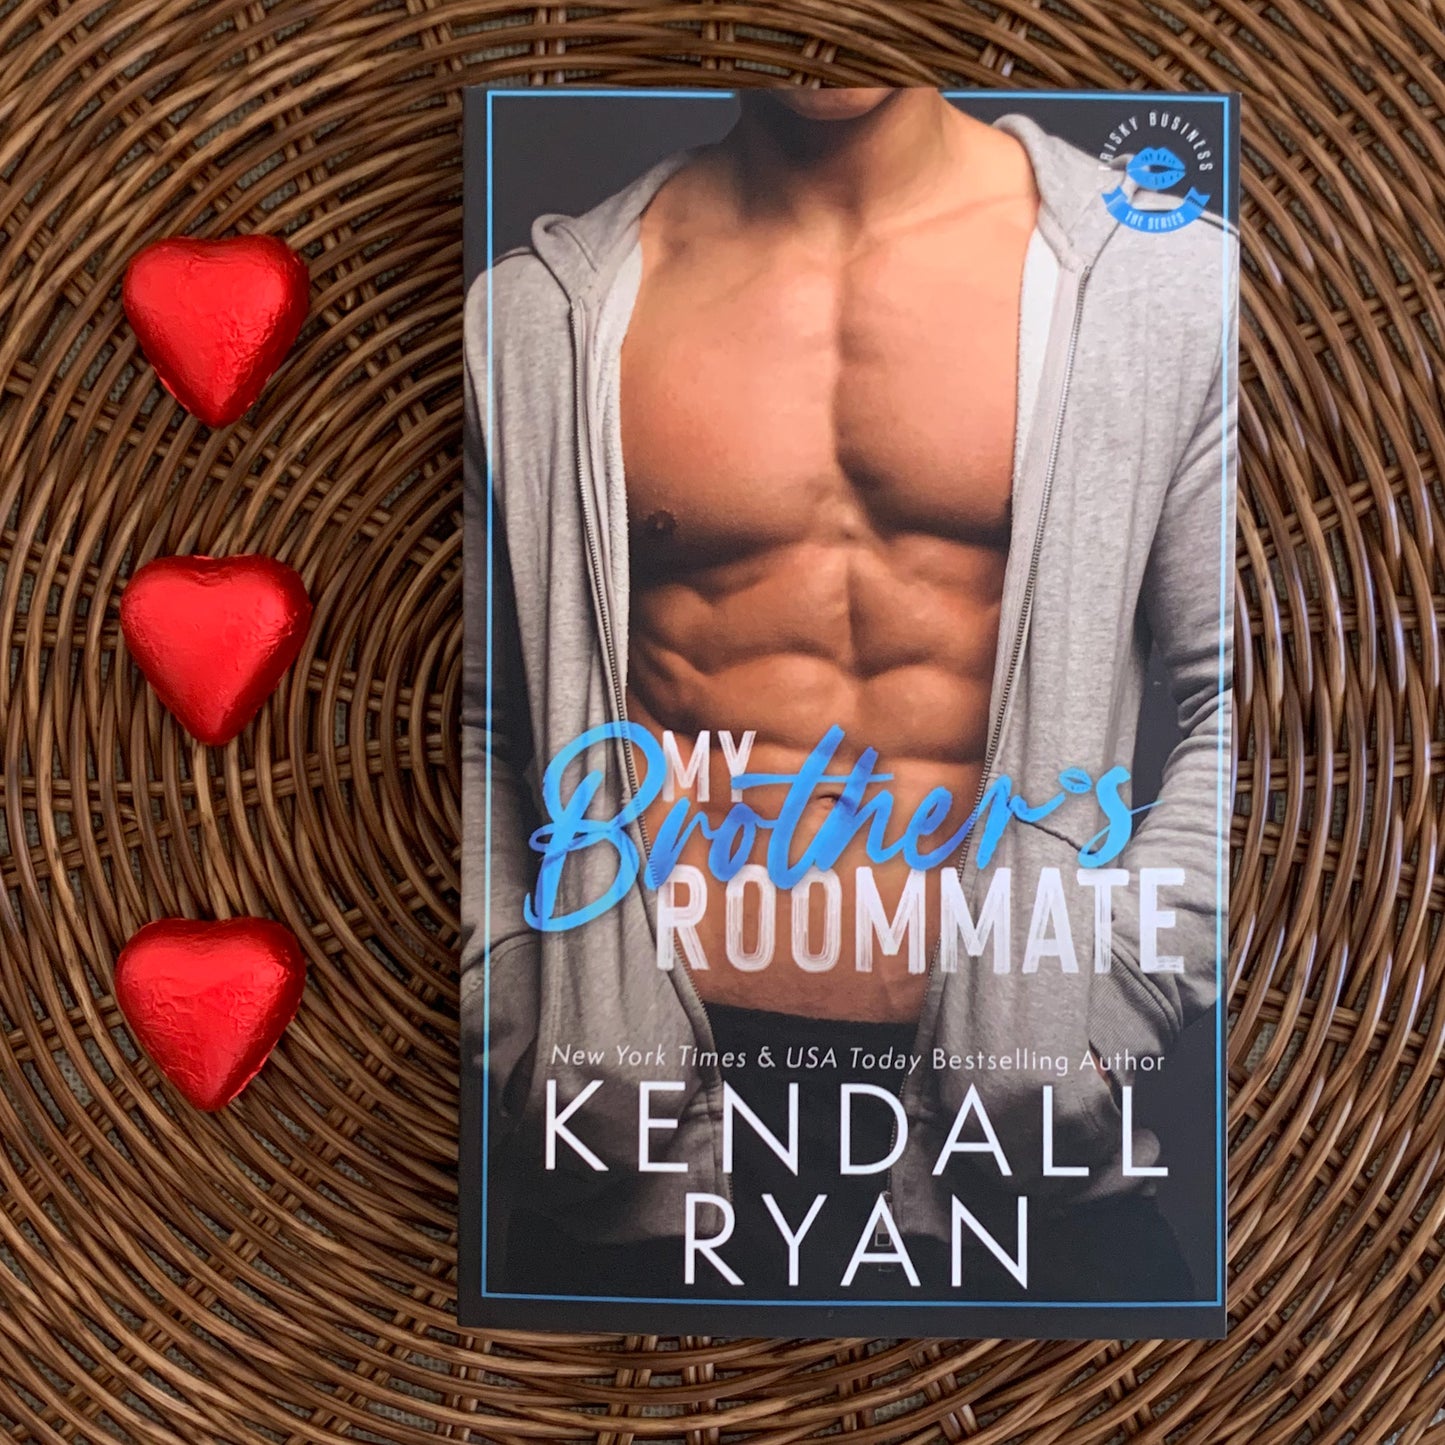 Frisky Business series by Kendall Ryan